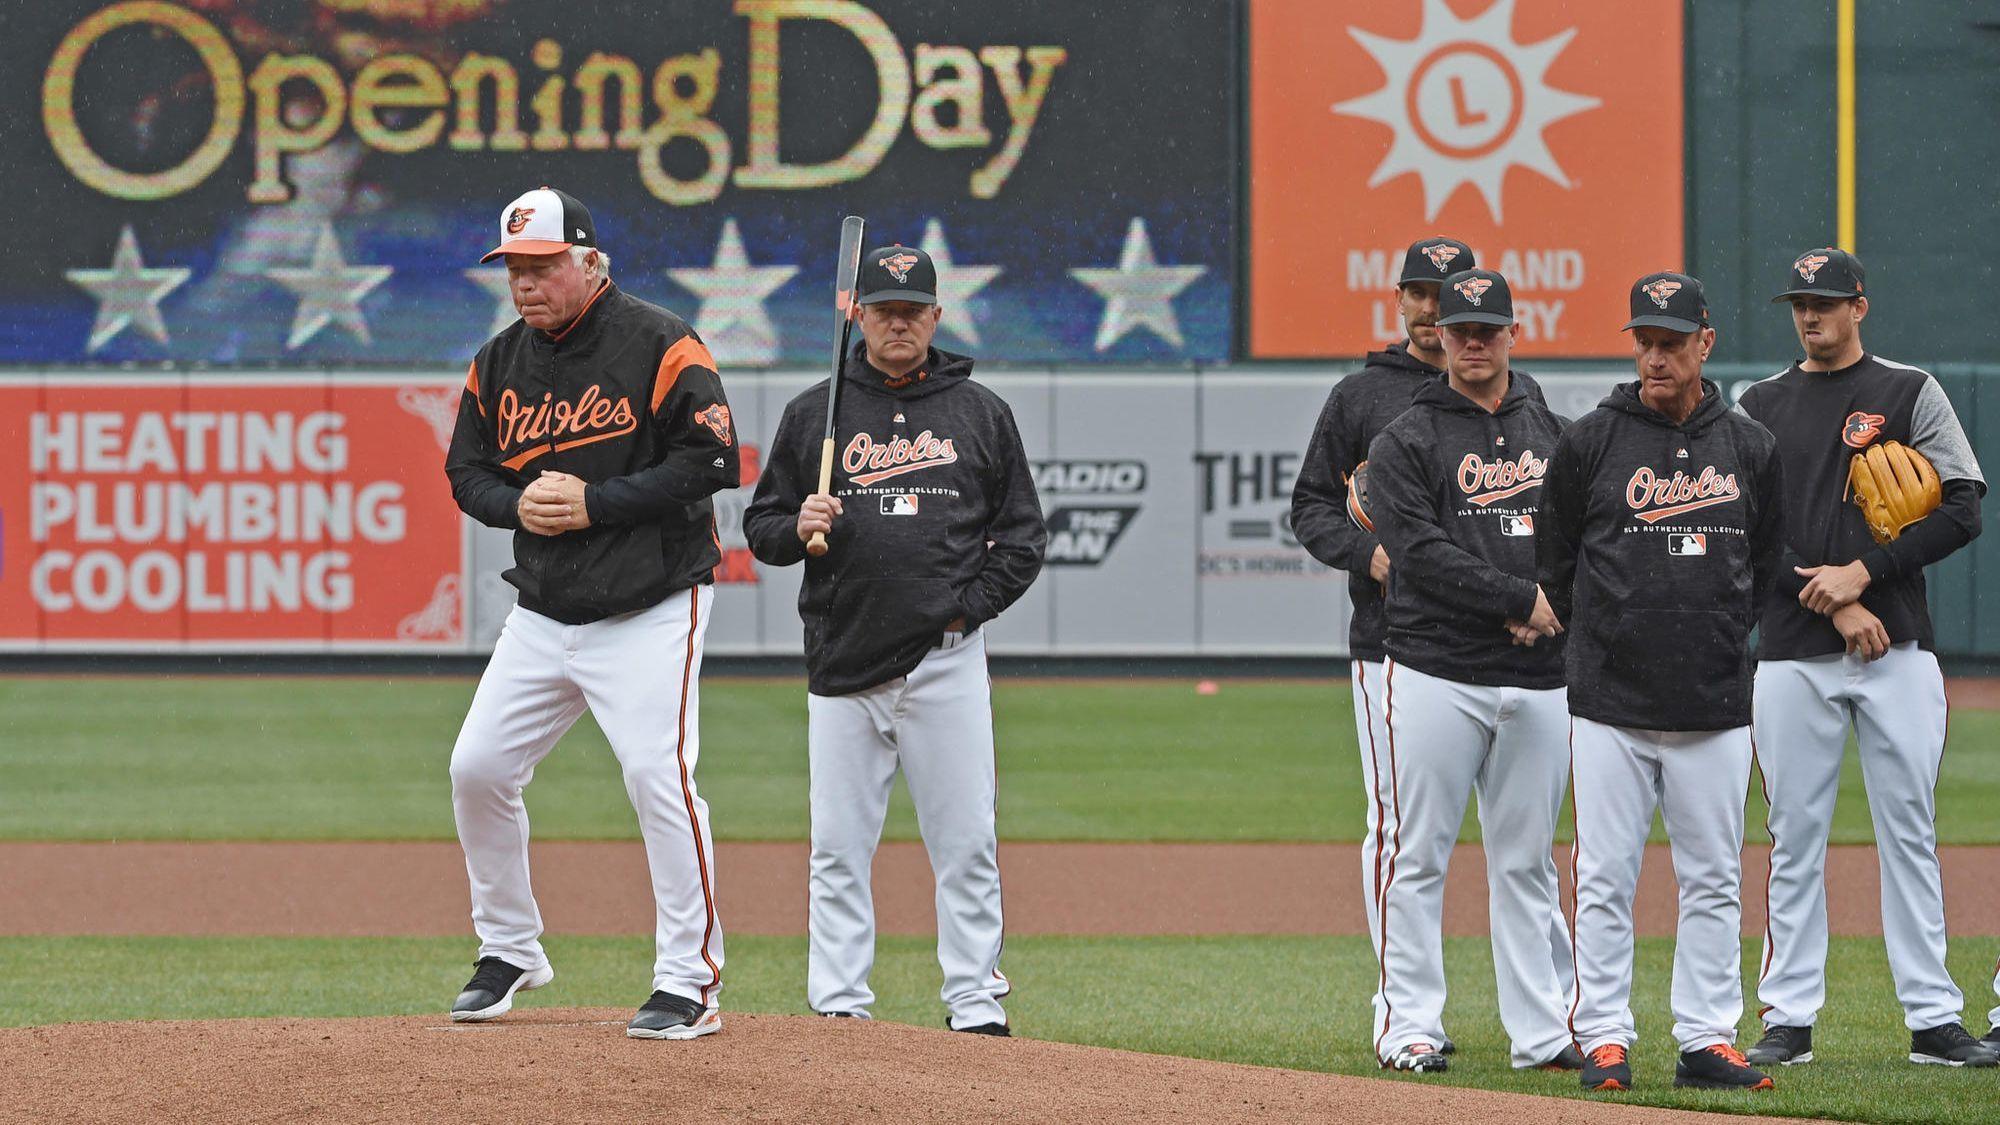 What you need to know about Orioles' Opening Day at Camden Yards